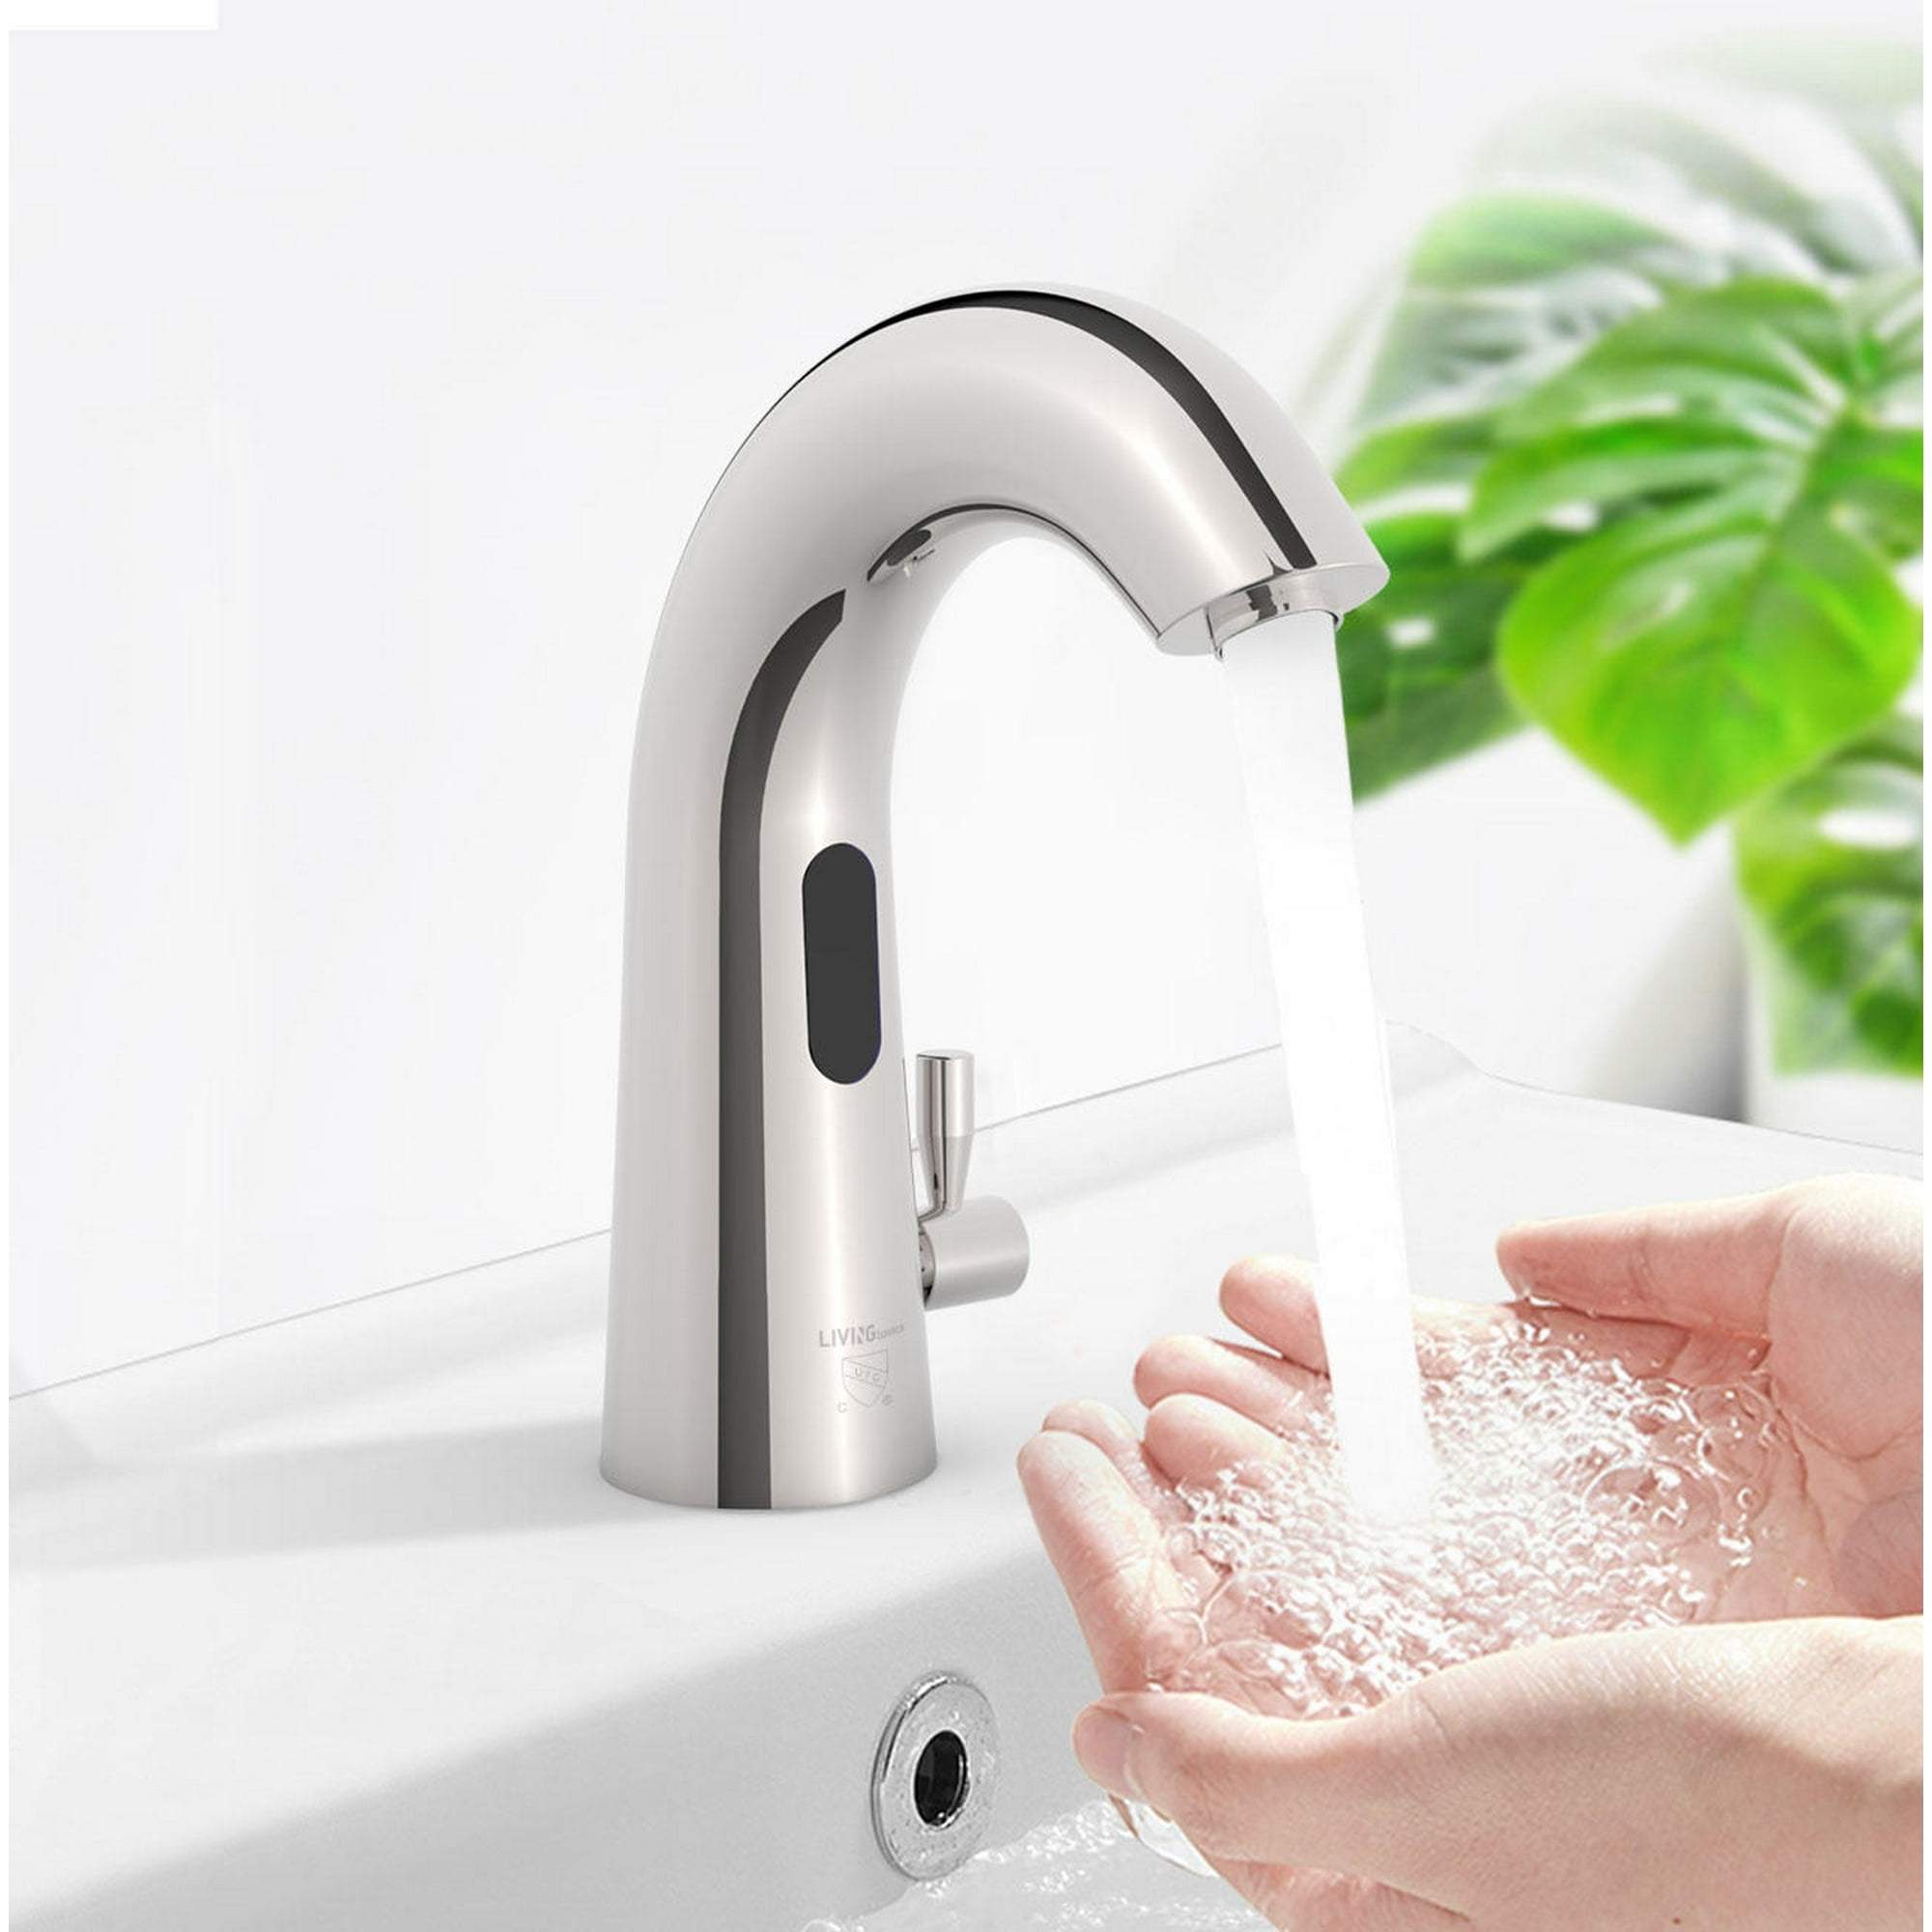 Automatic Touchless Basin Faucet With, Motion Sensor Bathroom Faucet Canada